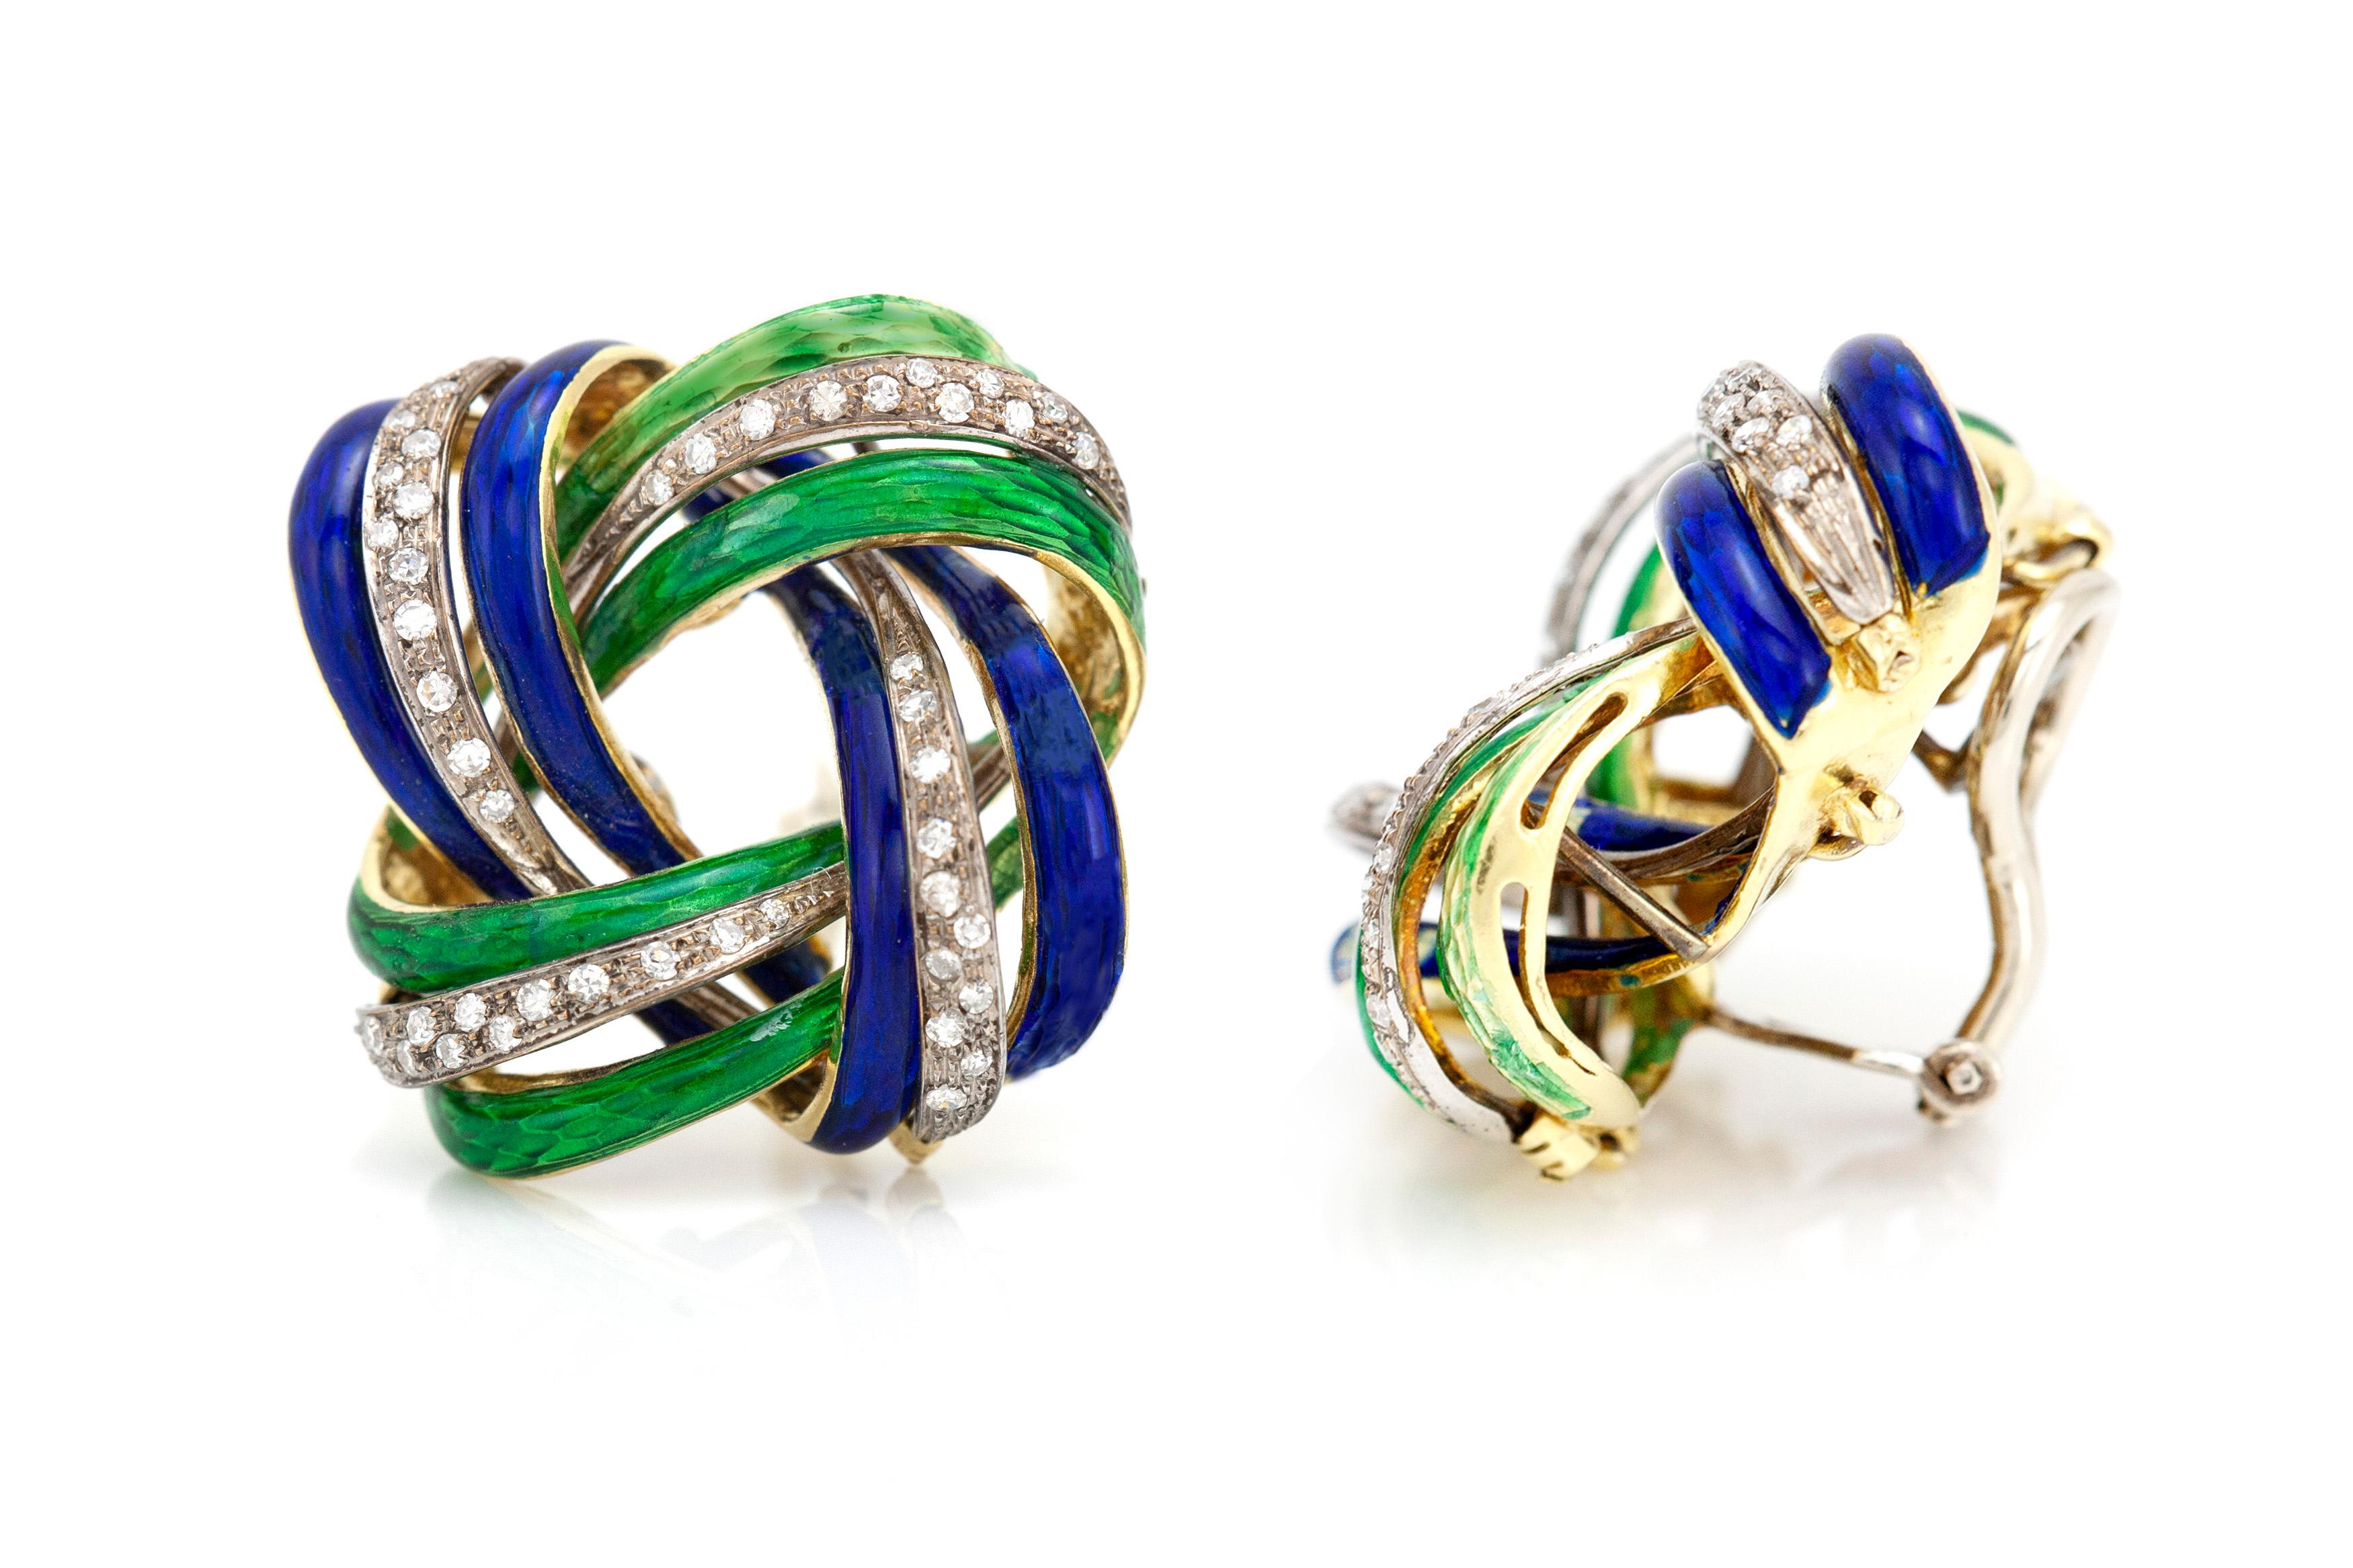 The earrings is finely crafted in 18k white gold with beautiful green and blue enamel and with diamonds weighing approximately total of 1.00 carat.